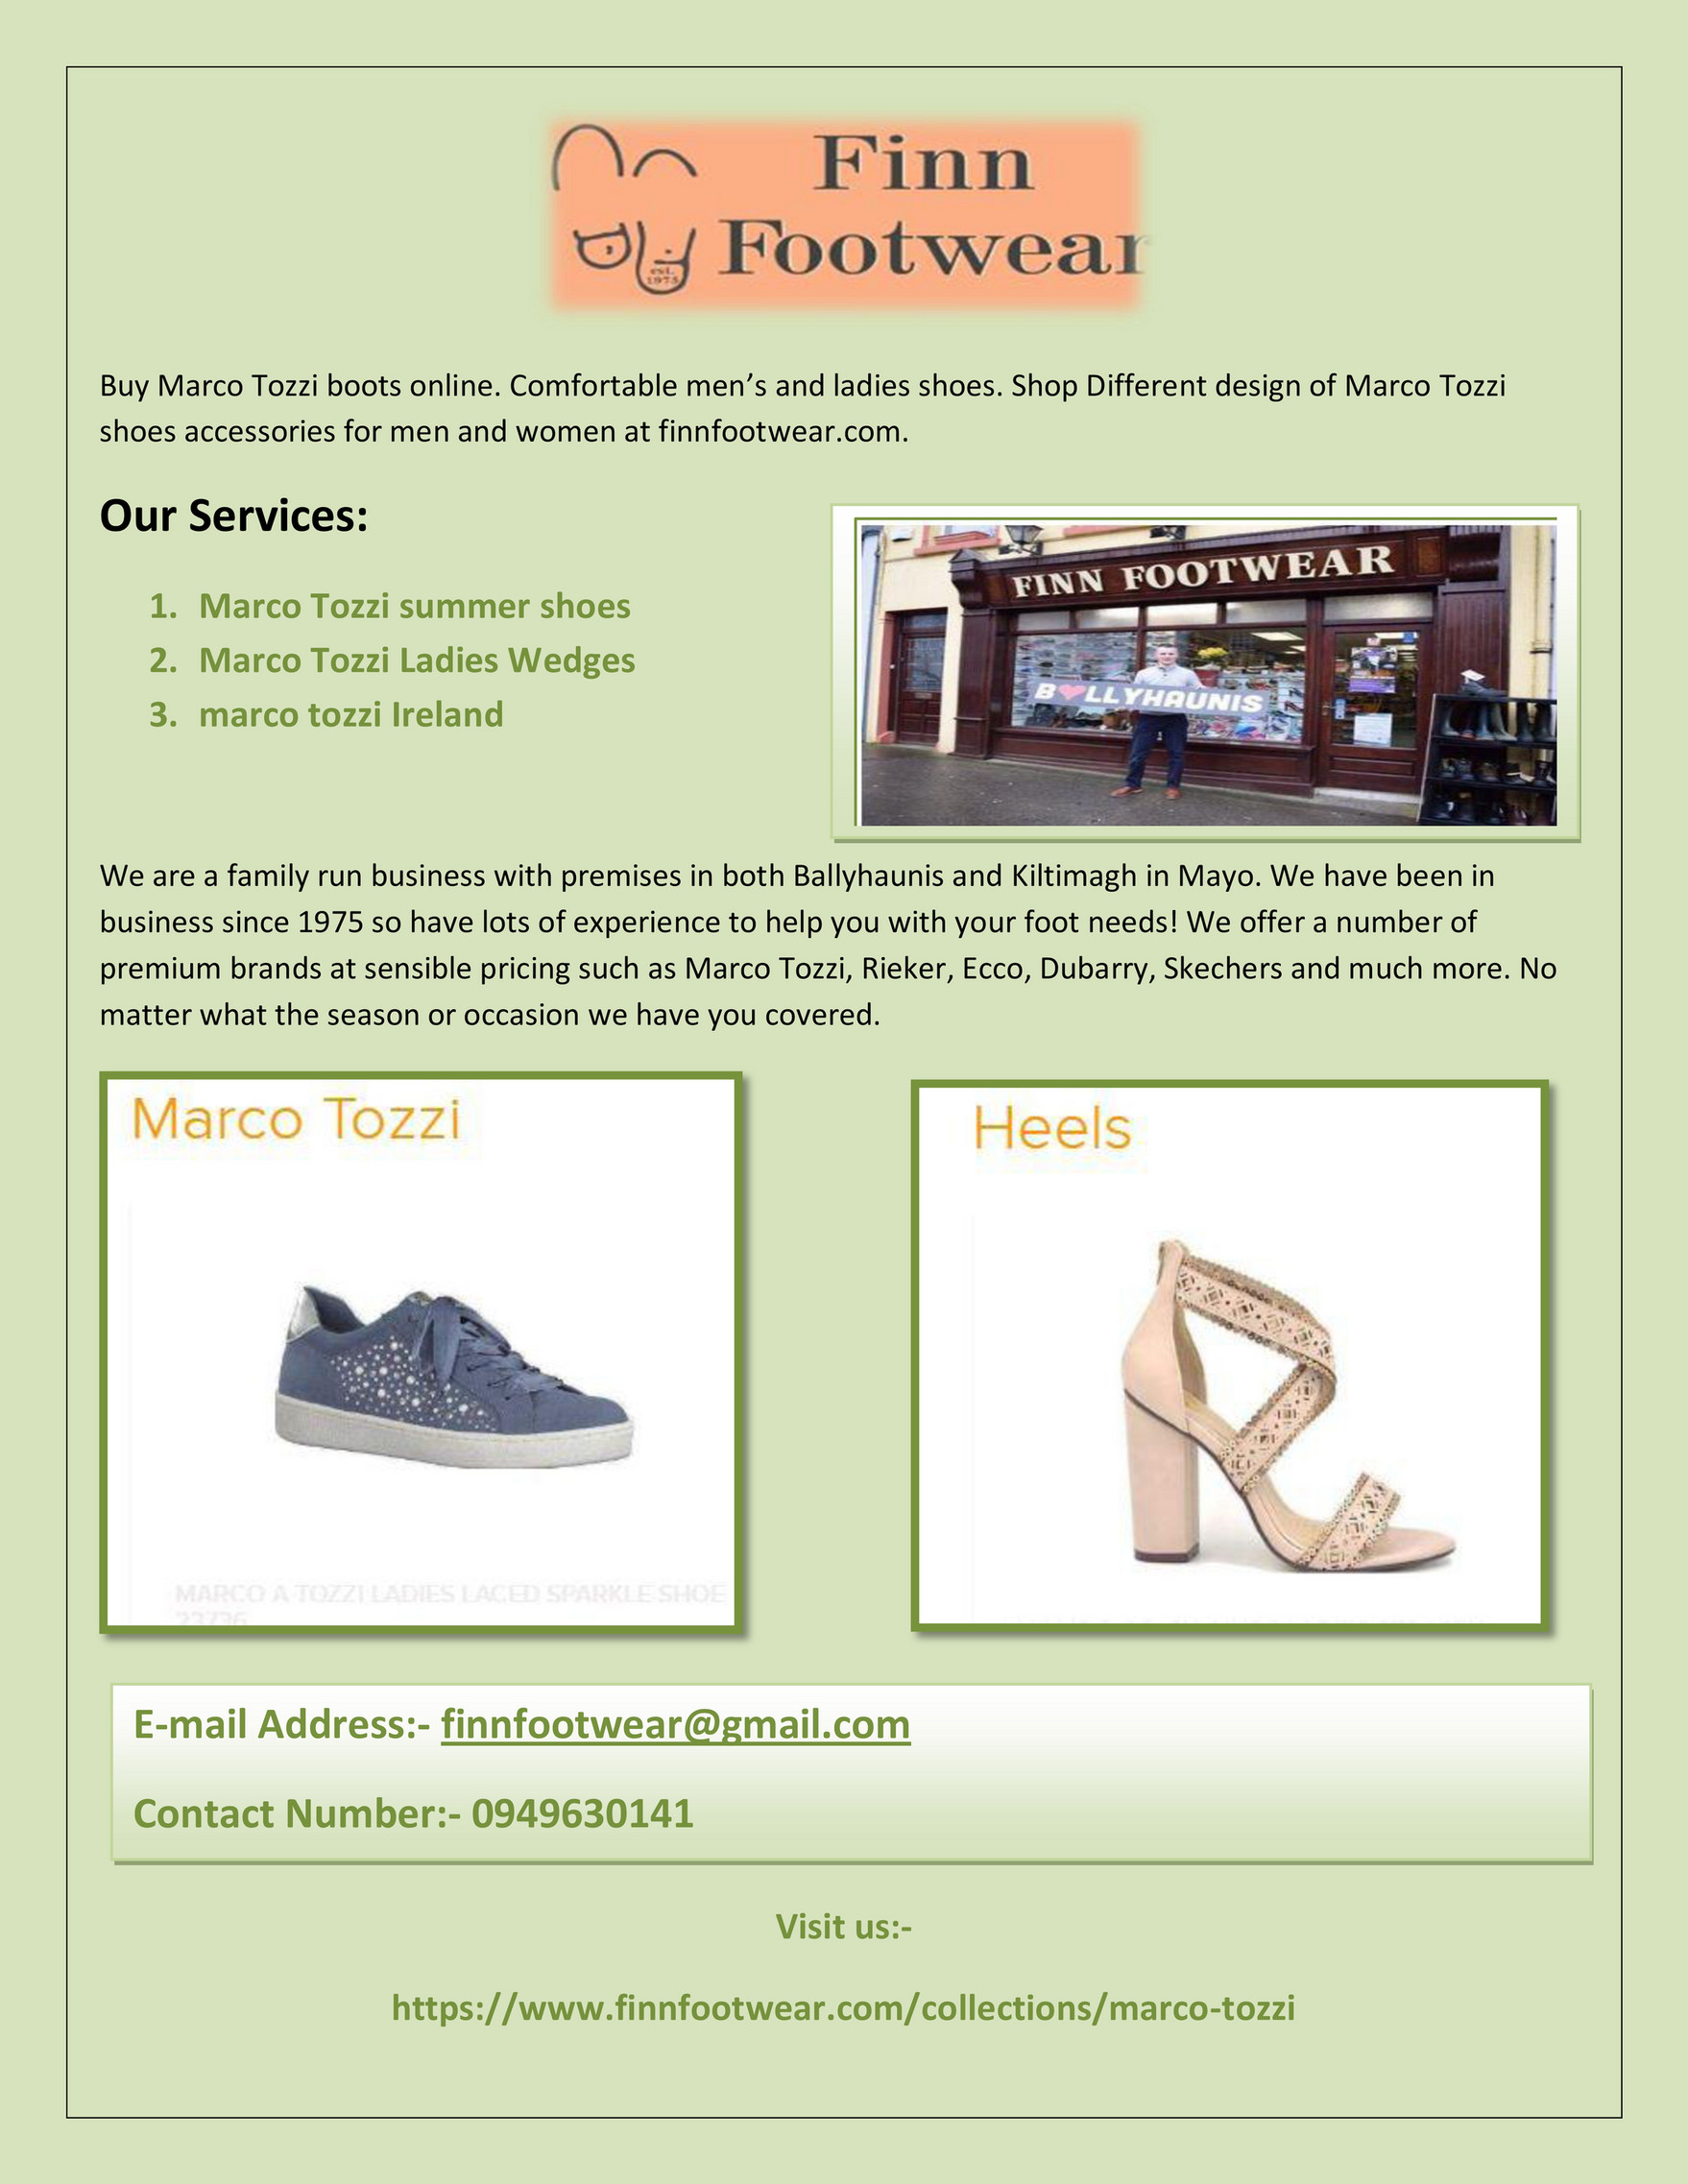 seo - Online Marco Tozzi boots and shoes at Finn Ireland - Page 1 - Created with Publitas.com